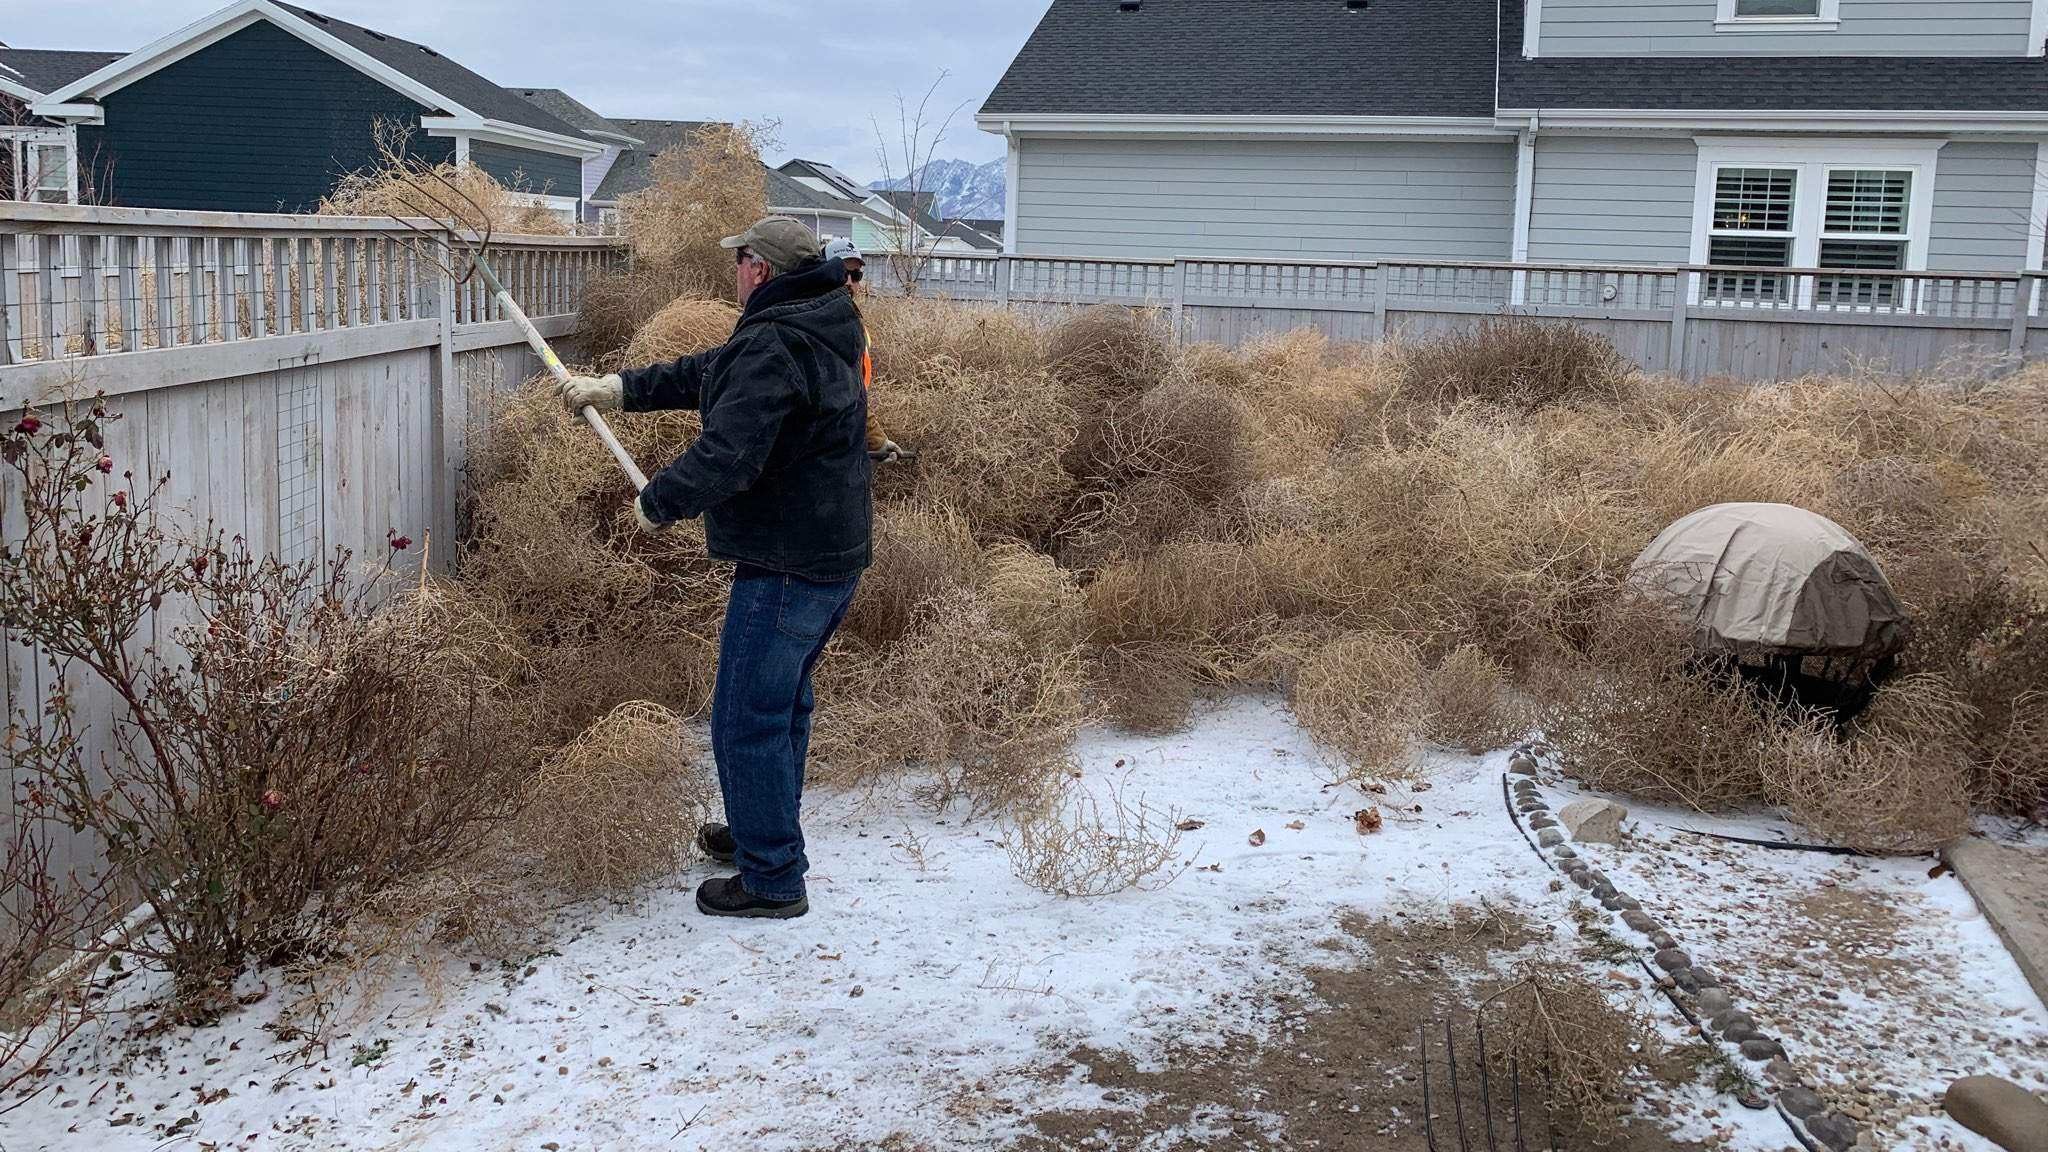 South Jordan said their cleanup efforts have concluded, taking 25 dumpsters-full of tumbleweeds to ...